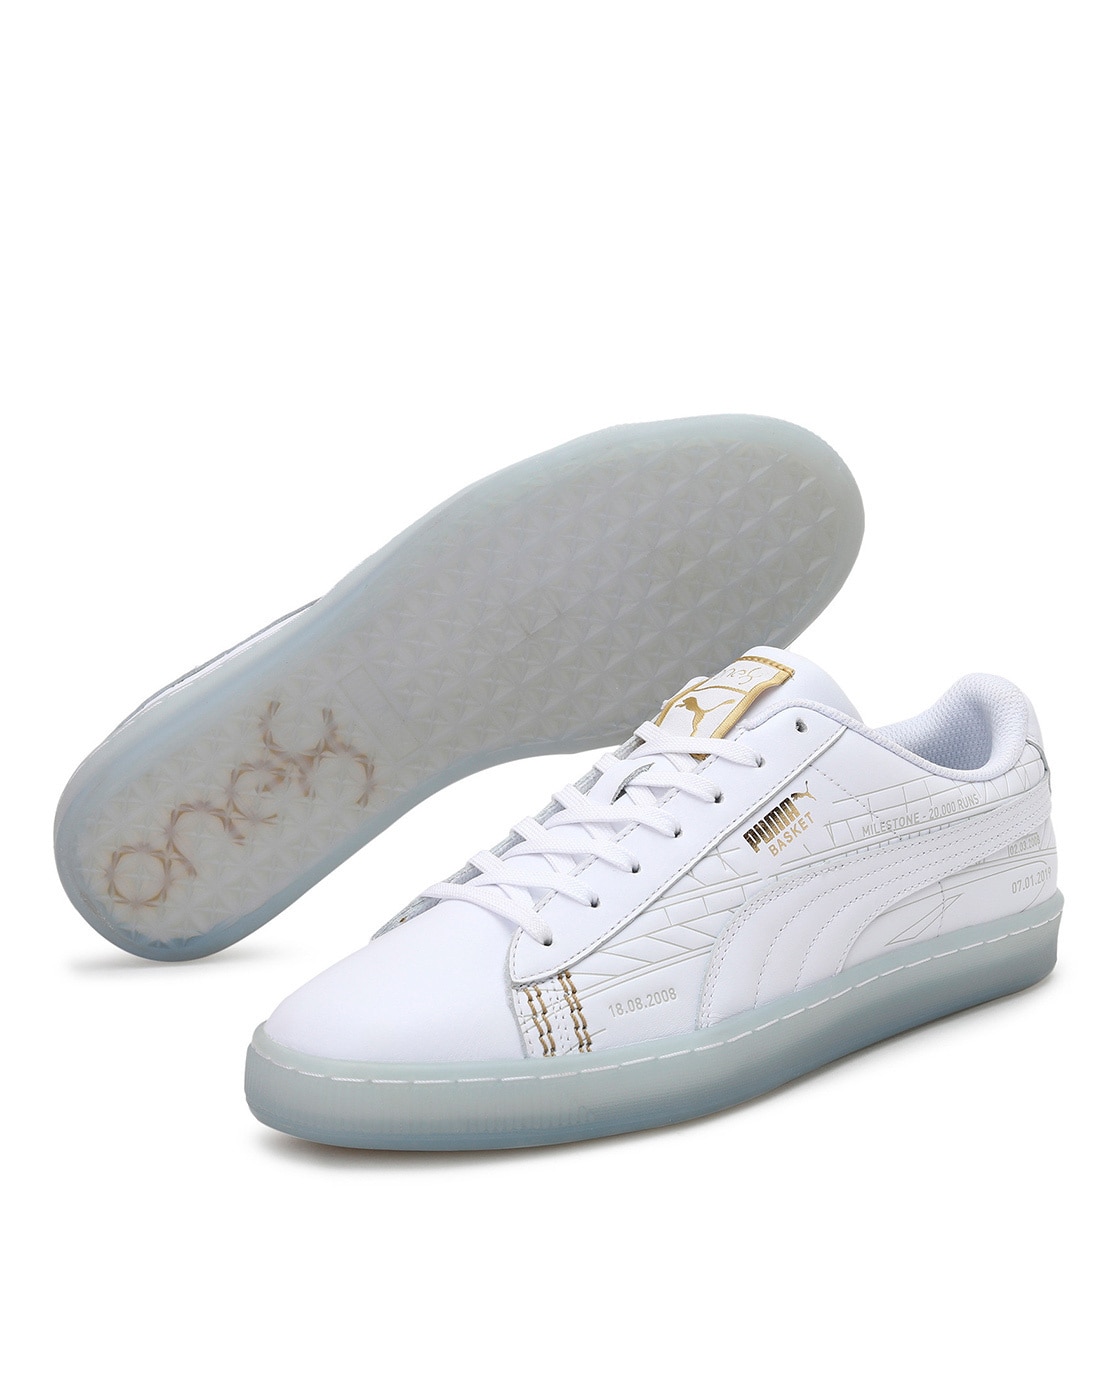 Discover 141+ puma one8 white sneakers